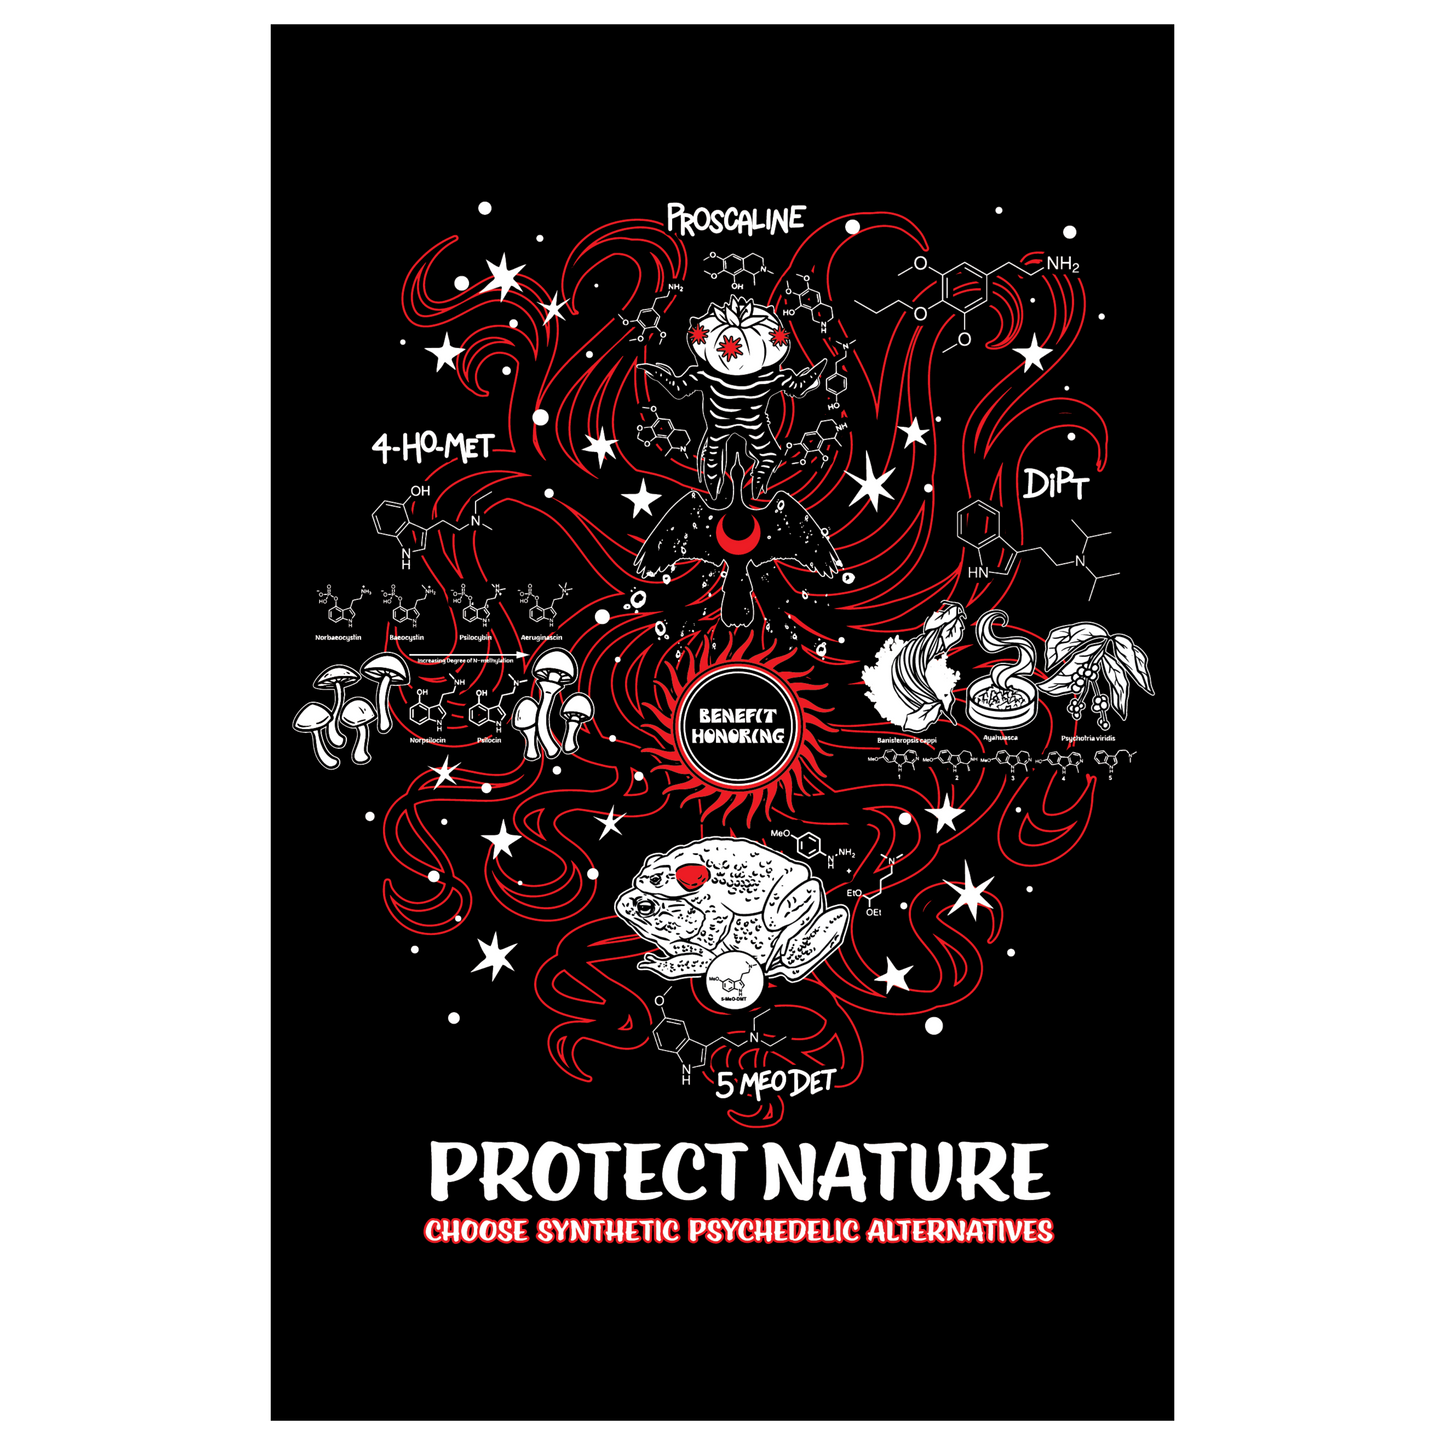 "Protect Nature" - 11" x 17" Poster